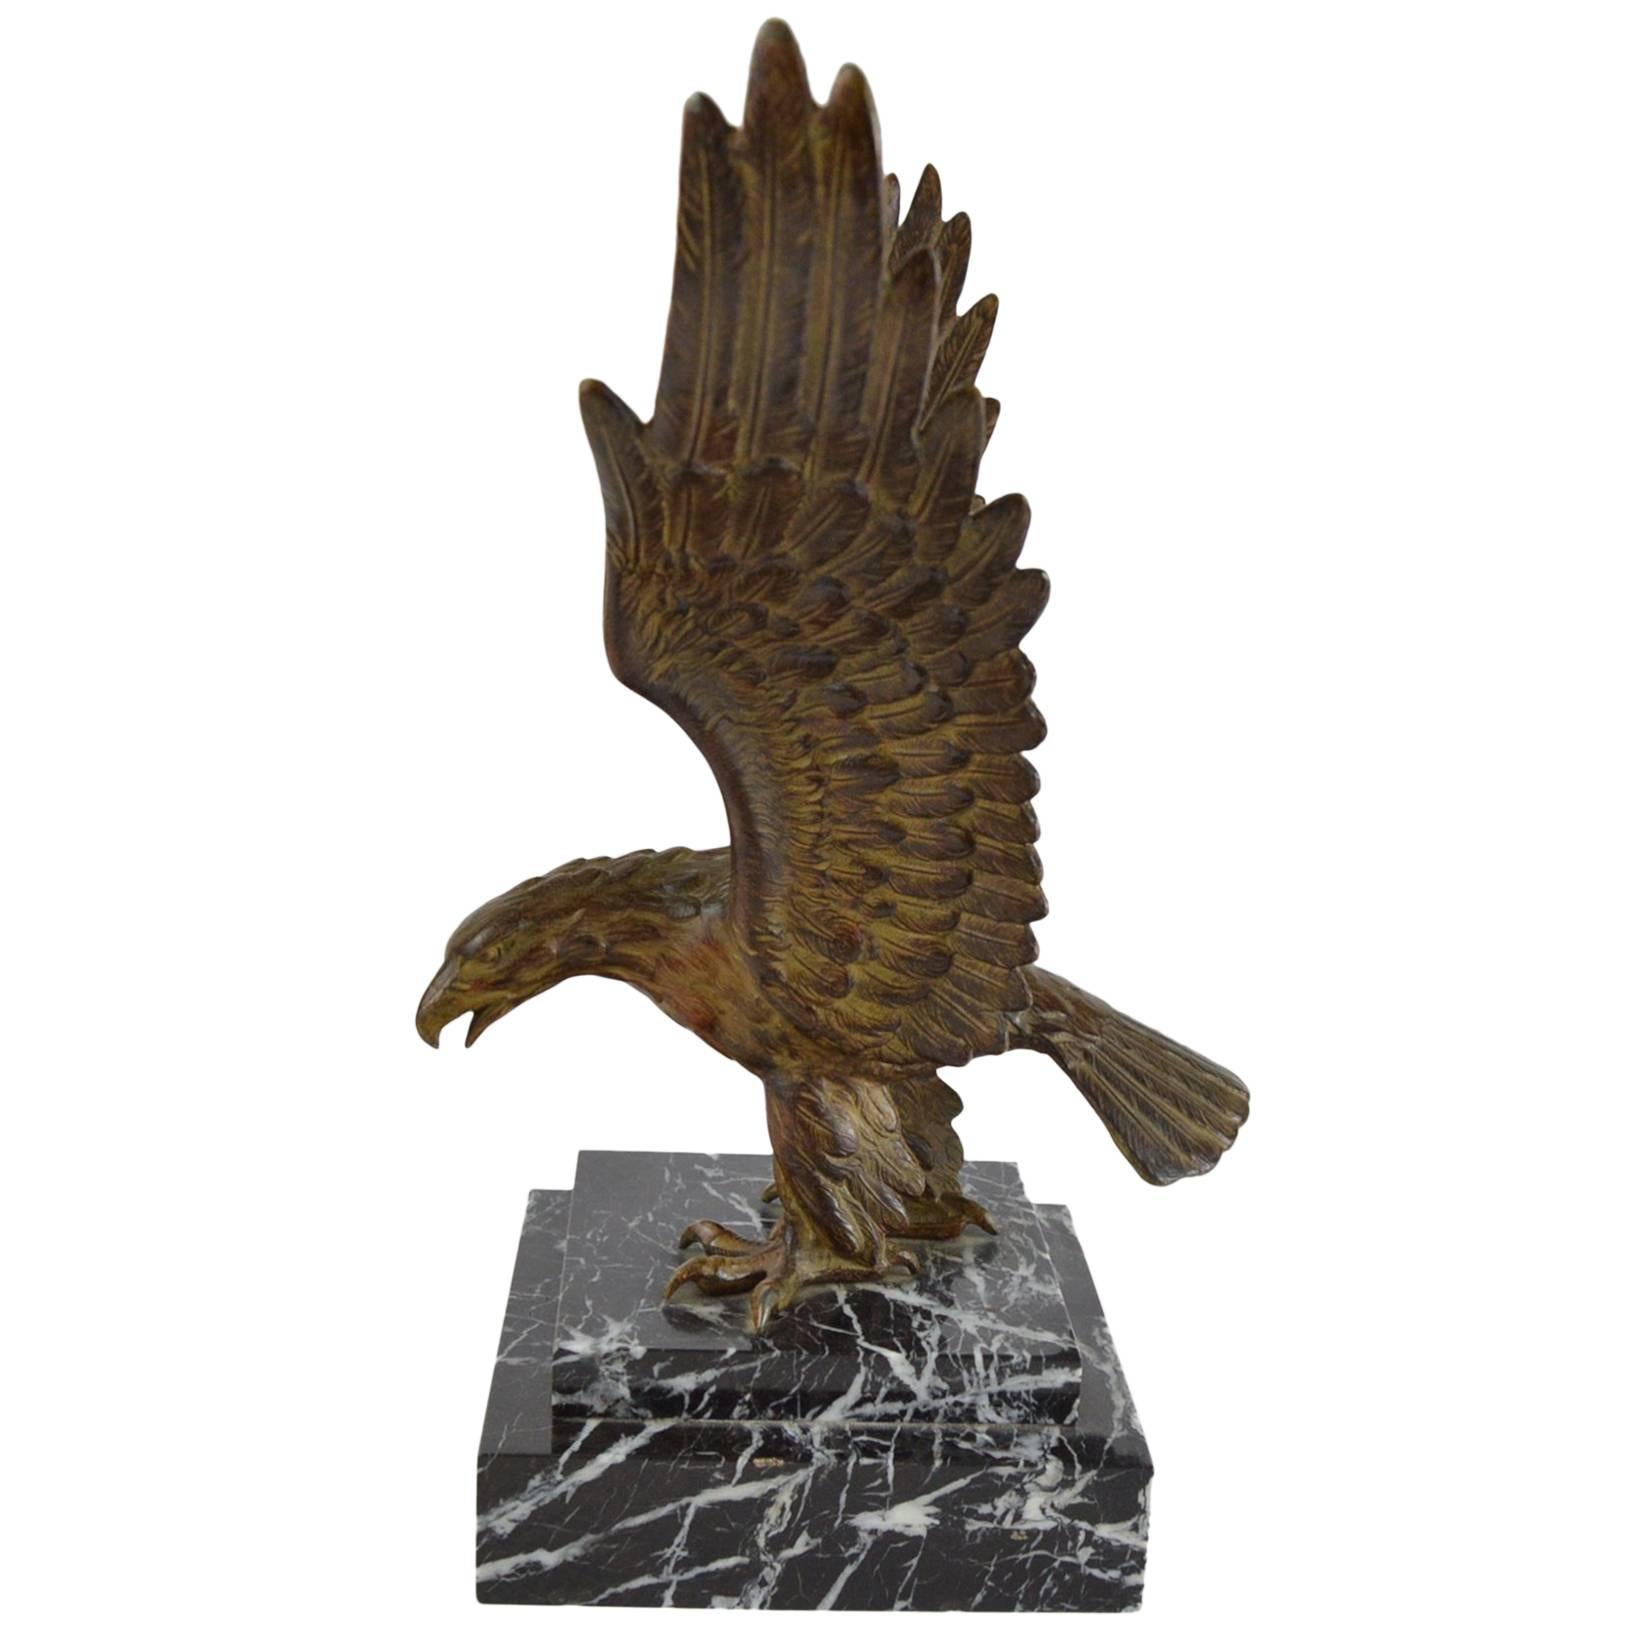 Art Deco Style Sculpture of an Eagle on a Marble Base